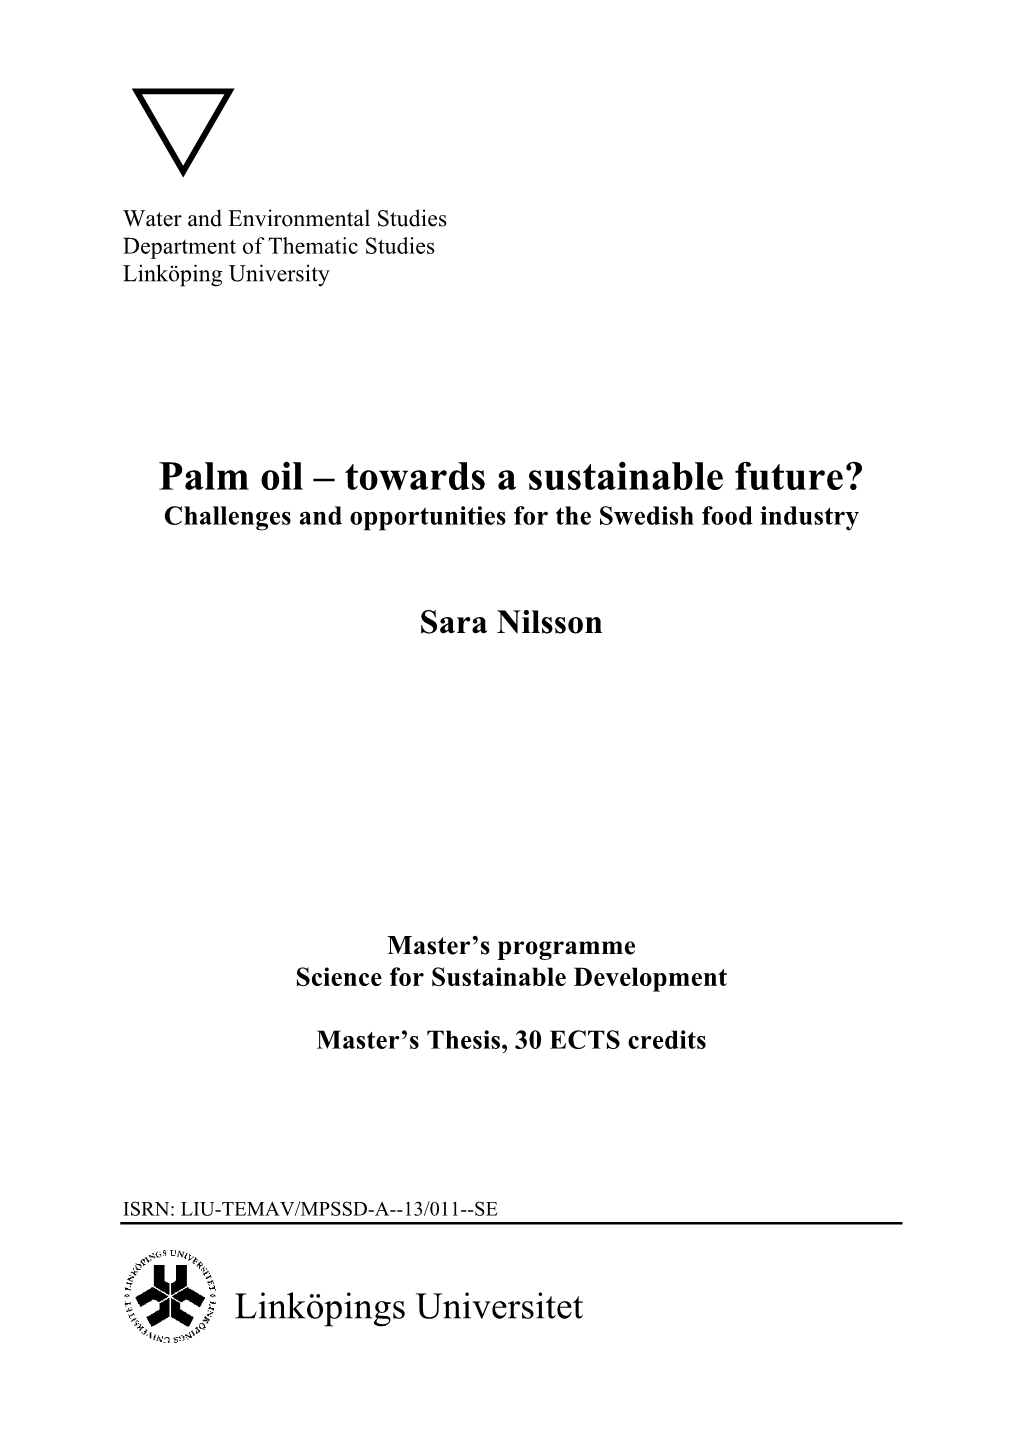 Palm Oil – Towards a Sustainable Future? Challenges and Opportunities for the Swedish Food Industry